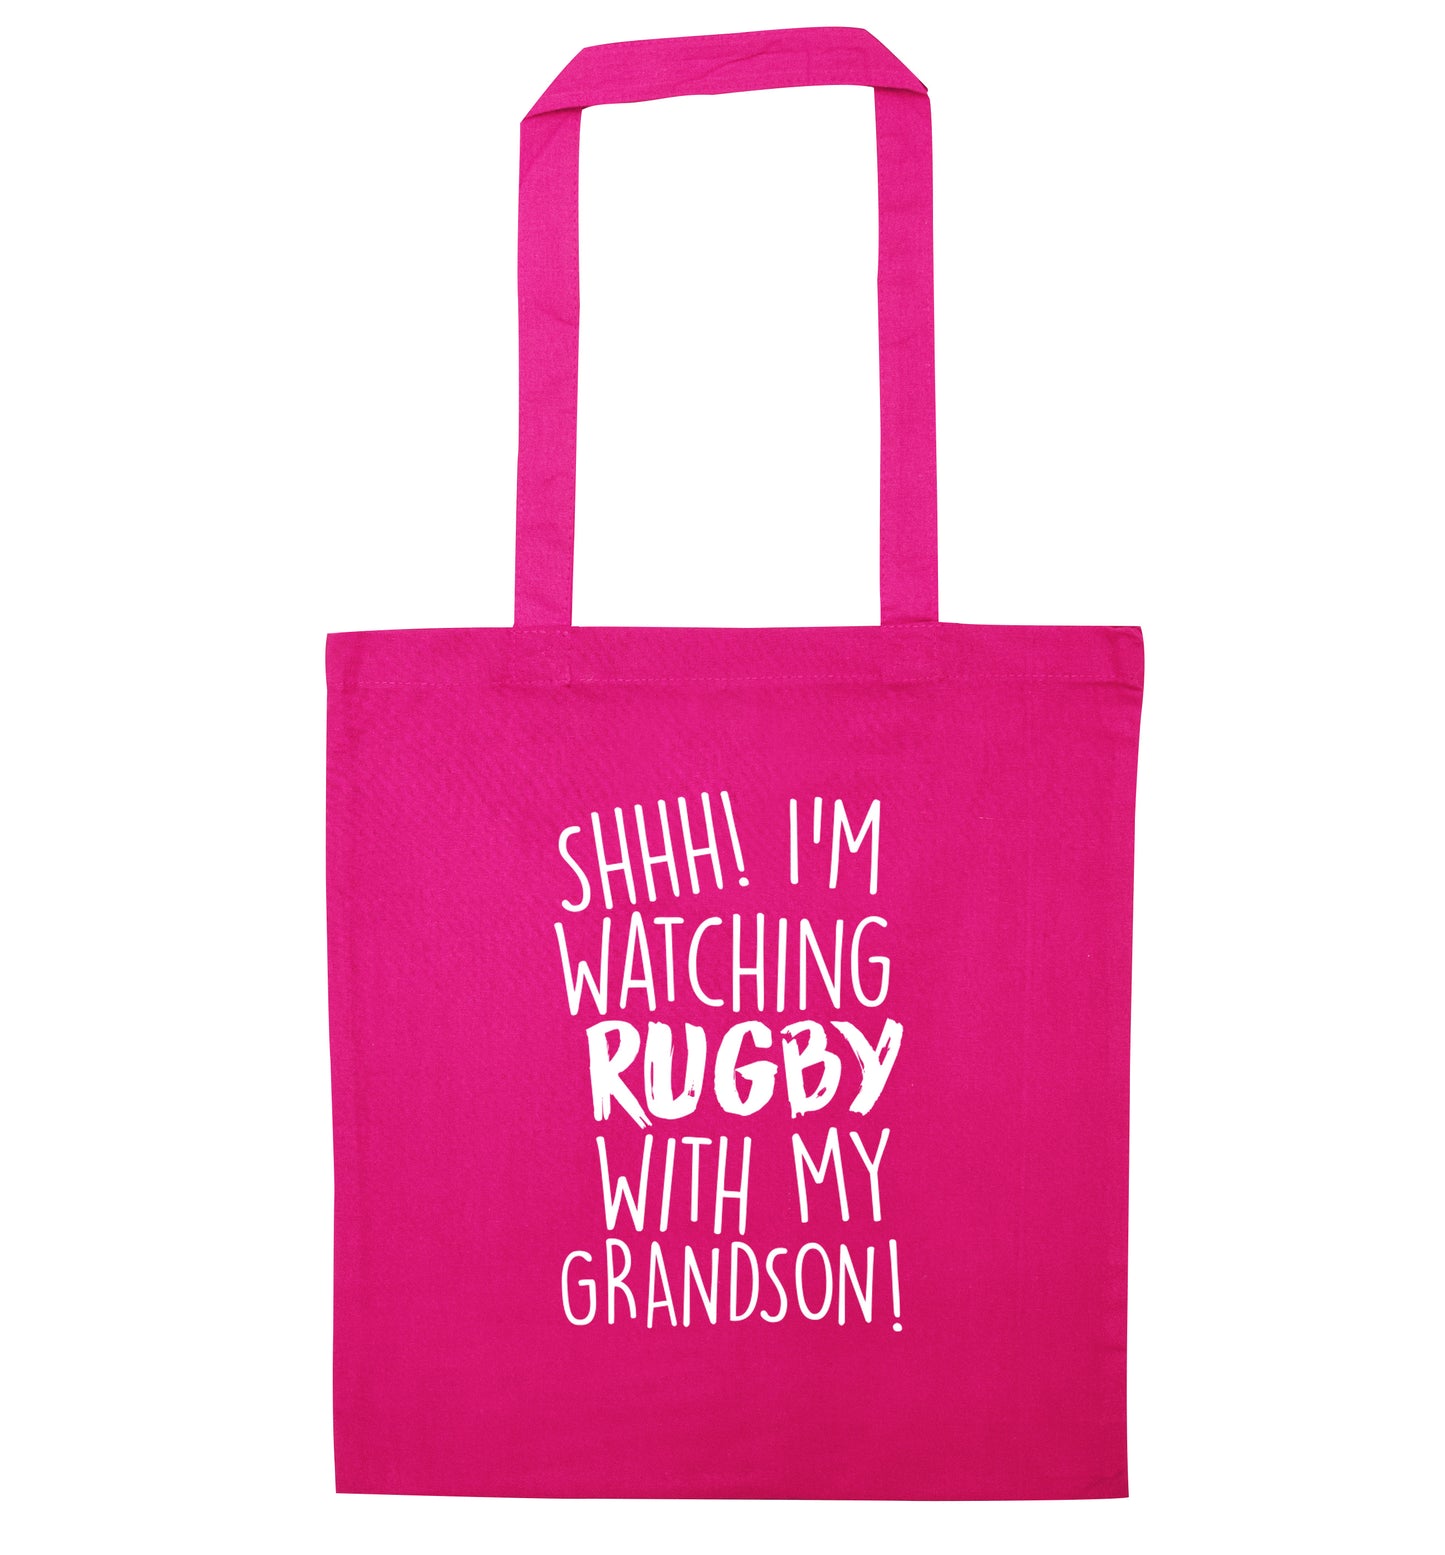 Shh I'm watching rugby with my grandson pink tote bag